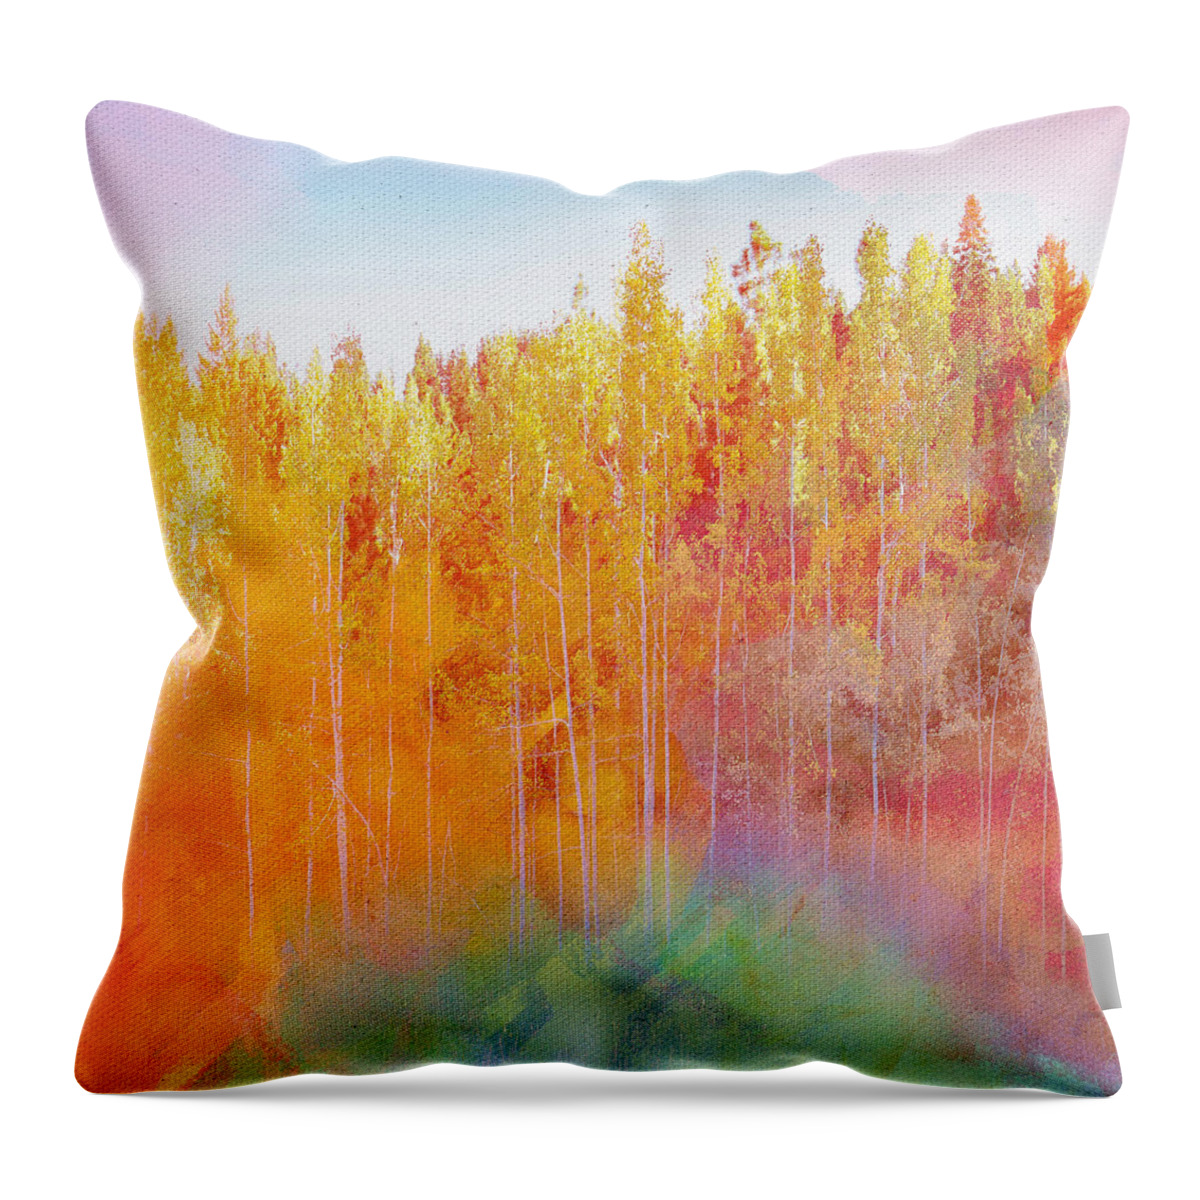 Graphic Design Throw Pillow featuring the digital art Enchanted Scenery #3 by Klara Acel